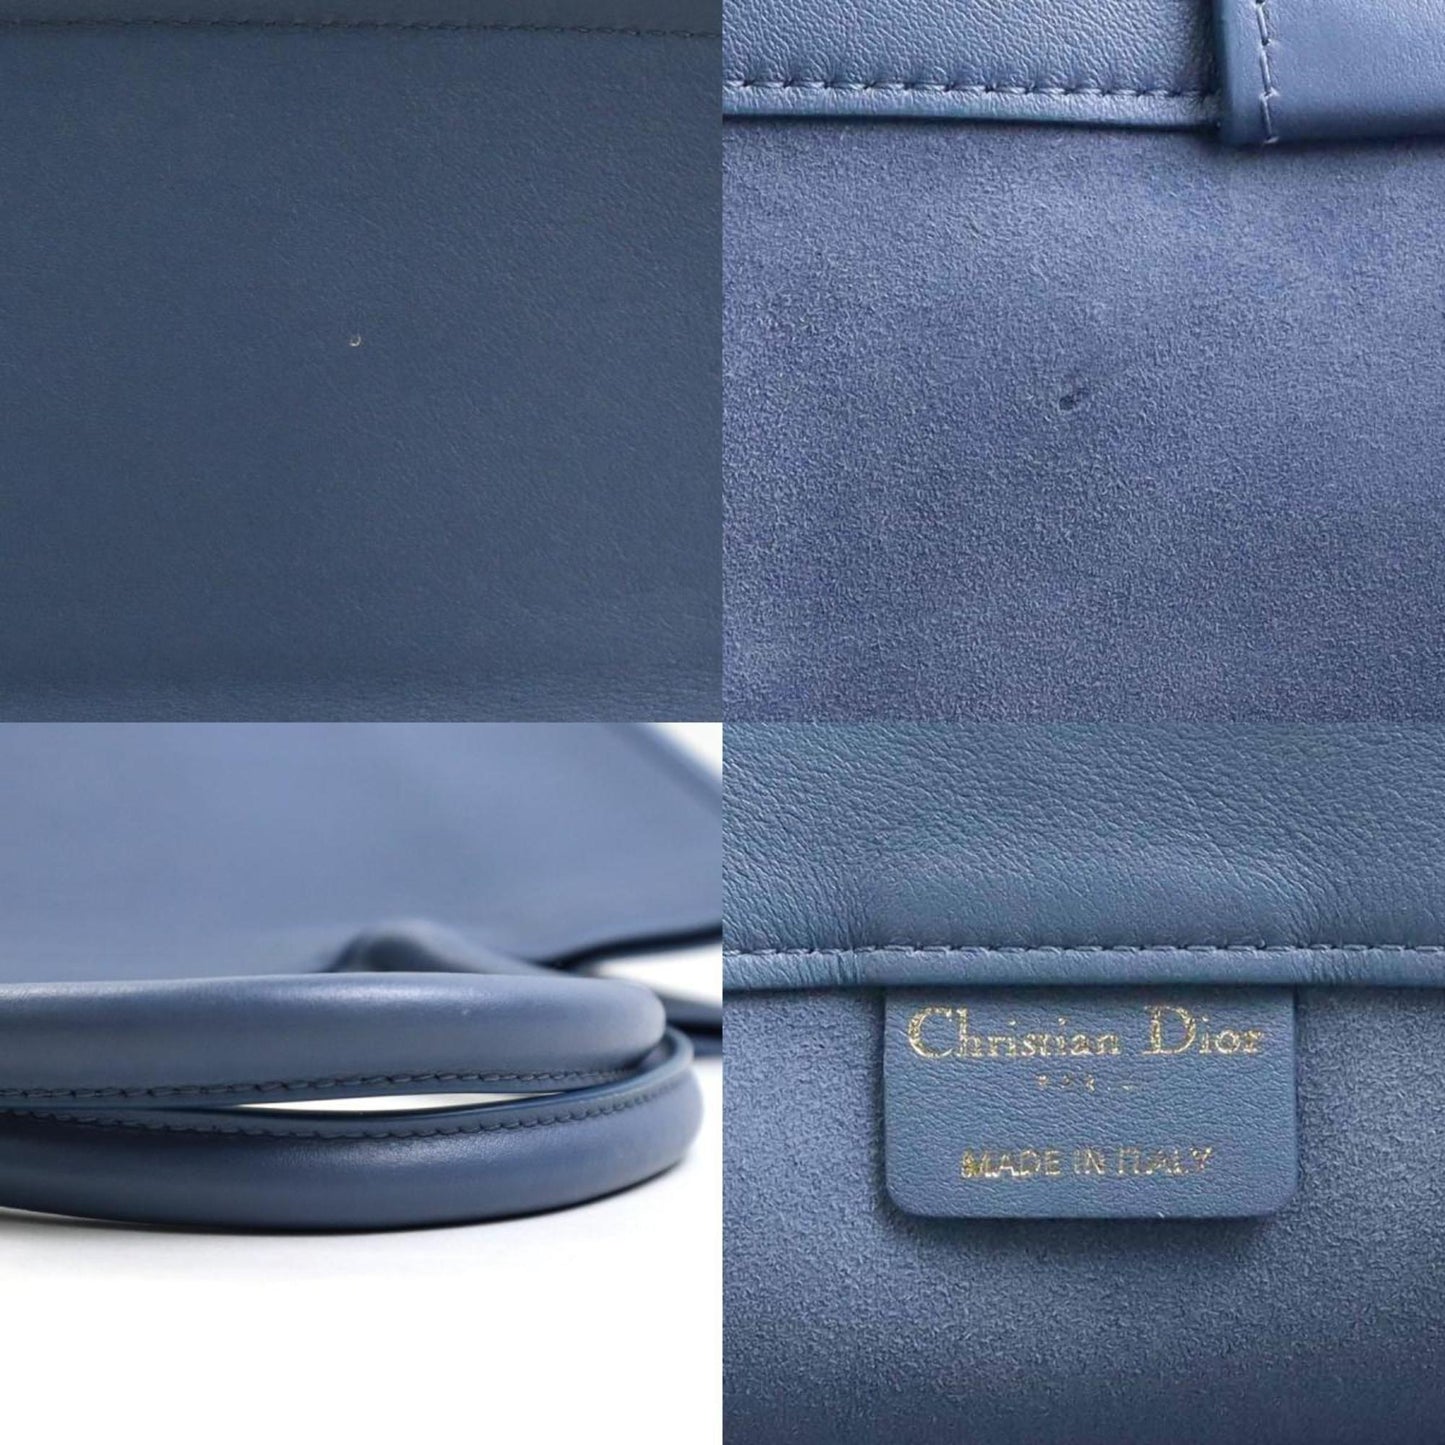 Dior Unisex Blue Leather Handbag and Tote Bag in Blue